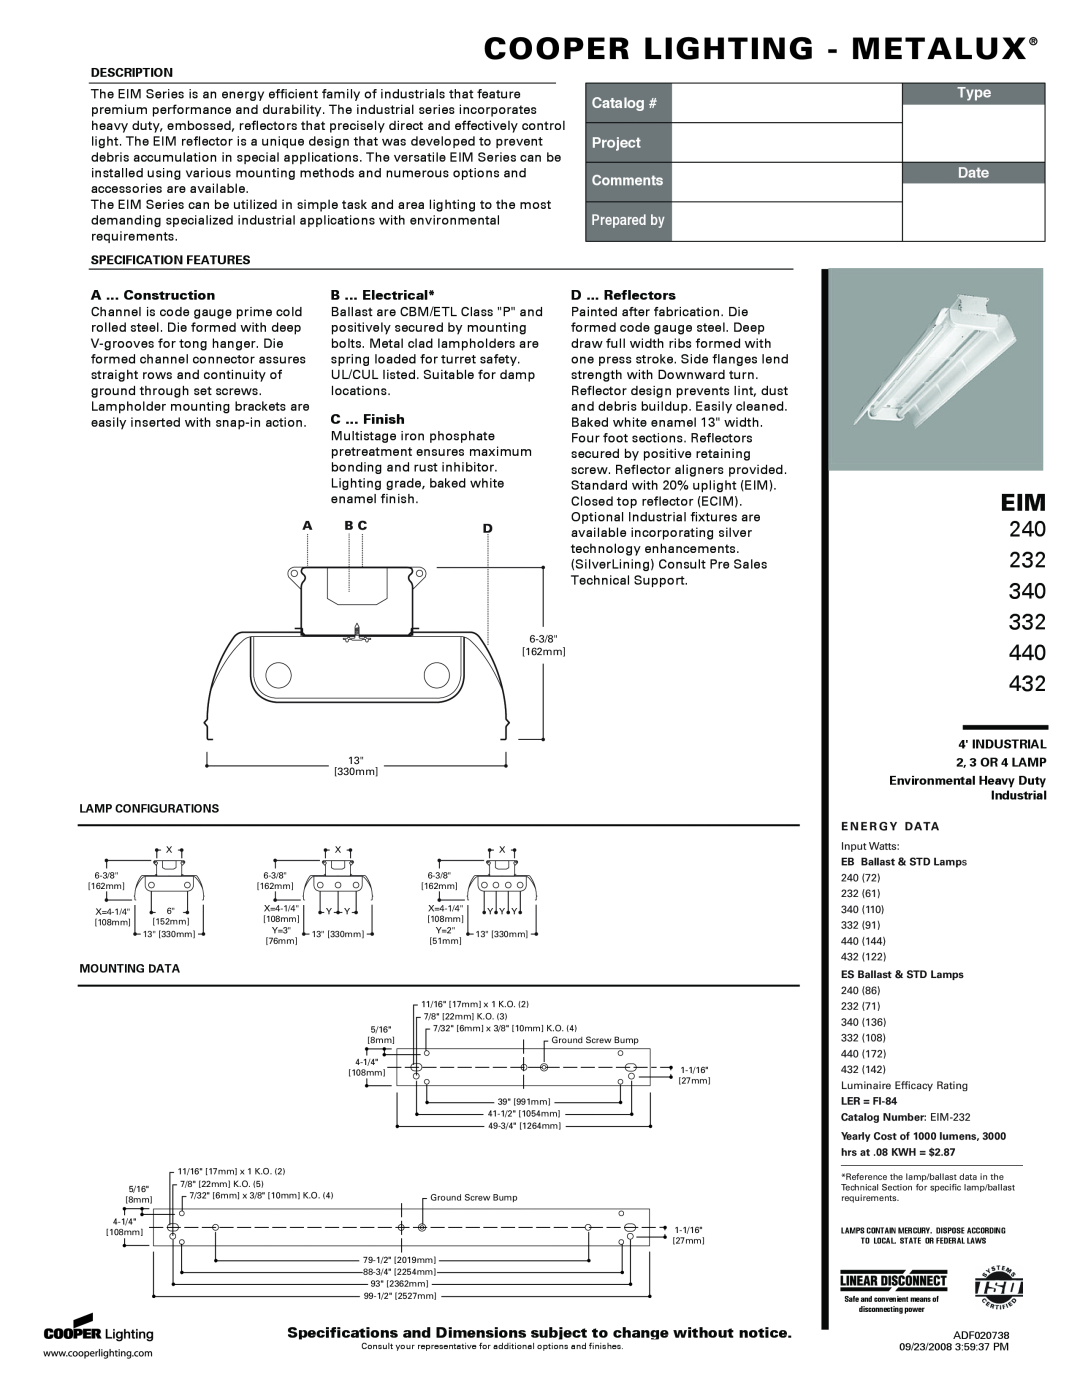 Cooper Lighting 332 specifications Cooper Lighting - Metalux, 240 232 340, Catalog #, Project Comments, Prepared by, Type 